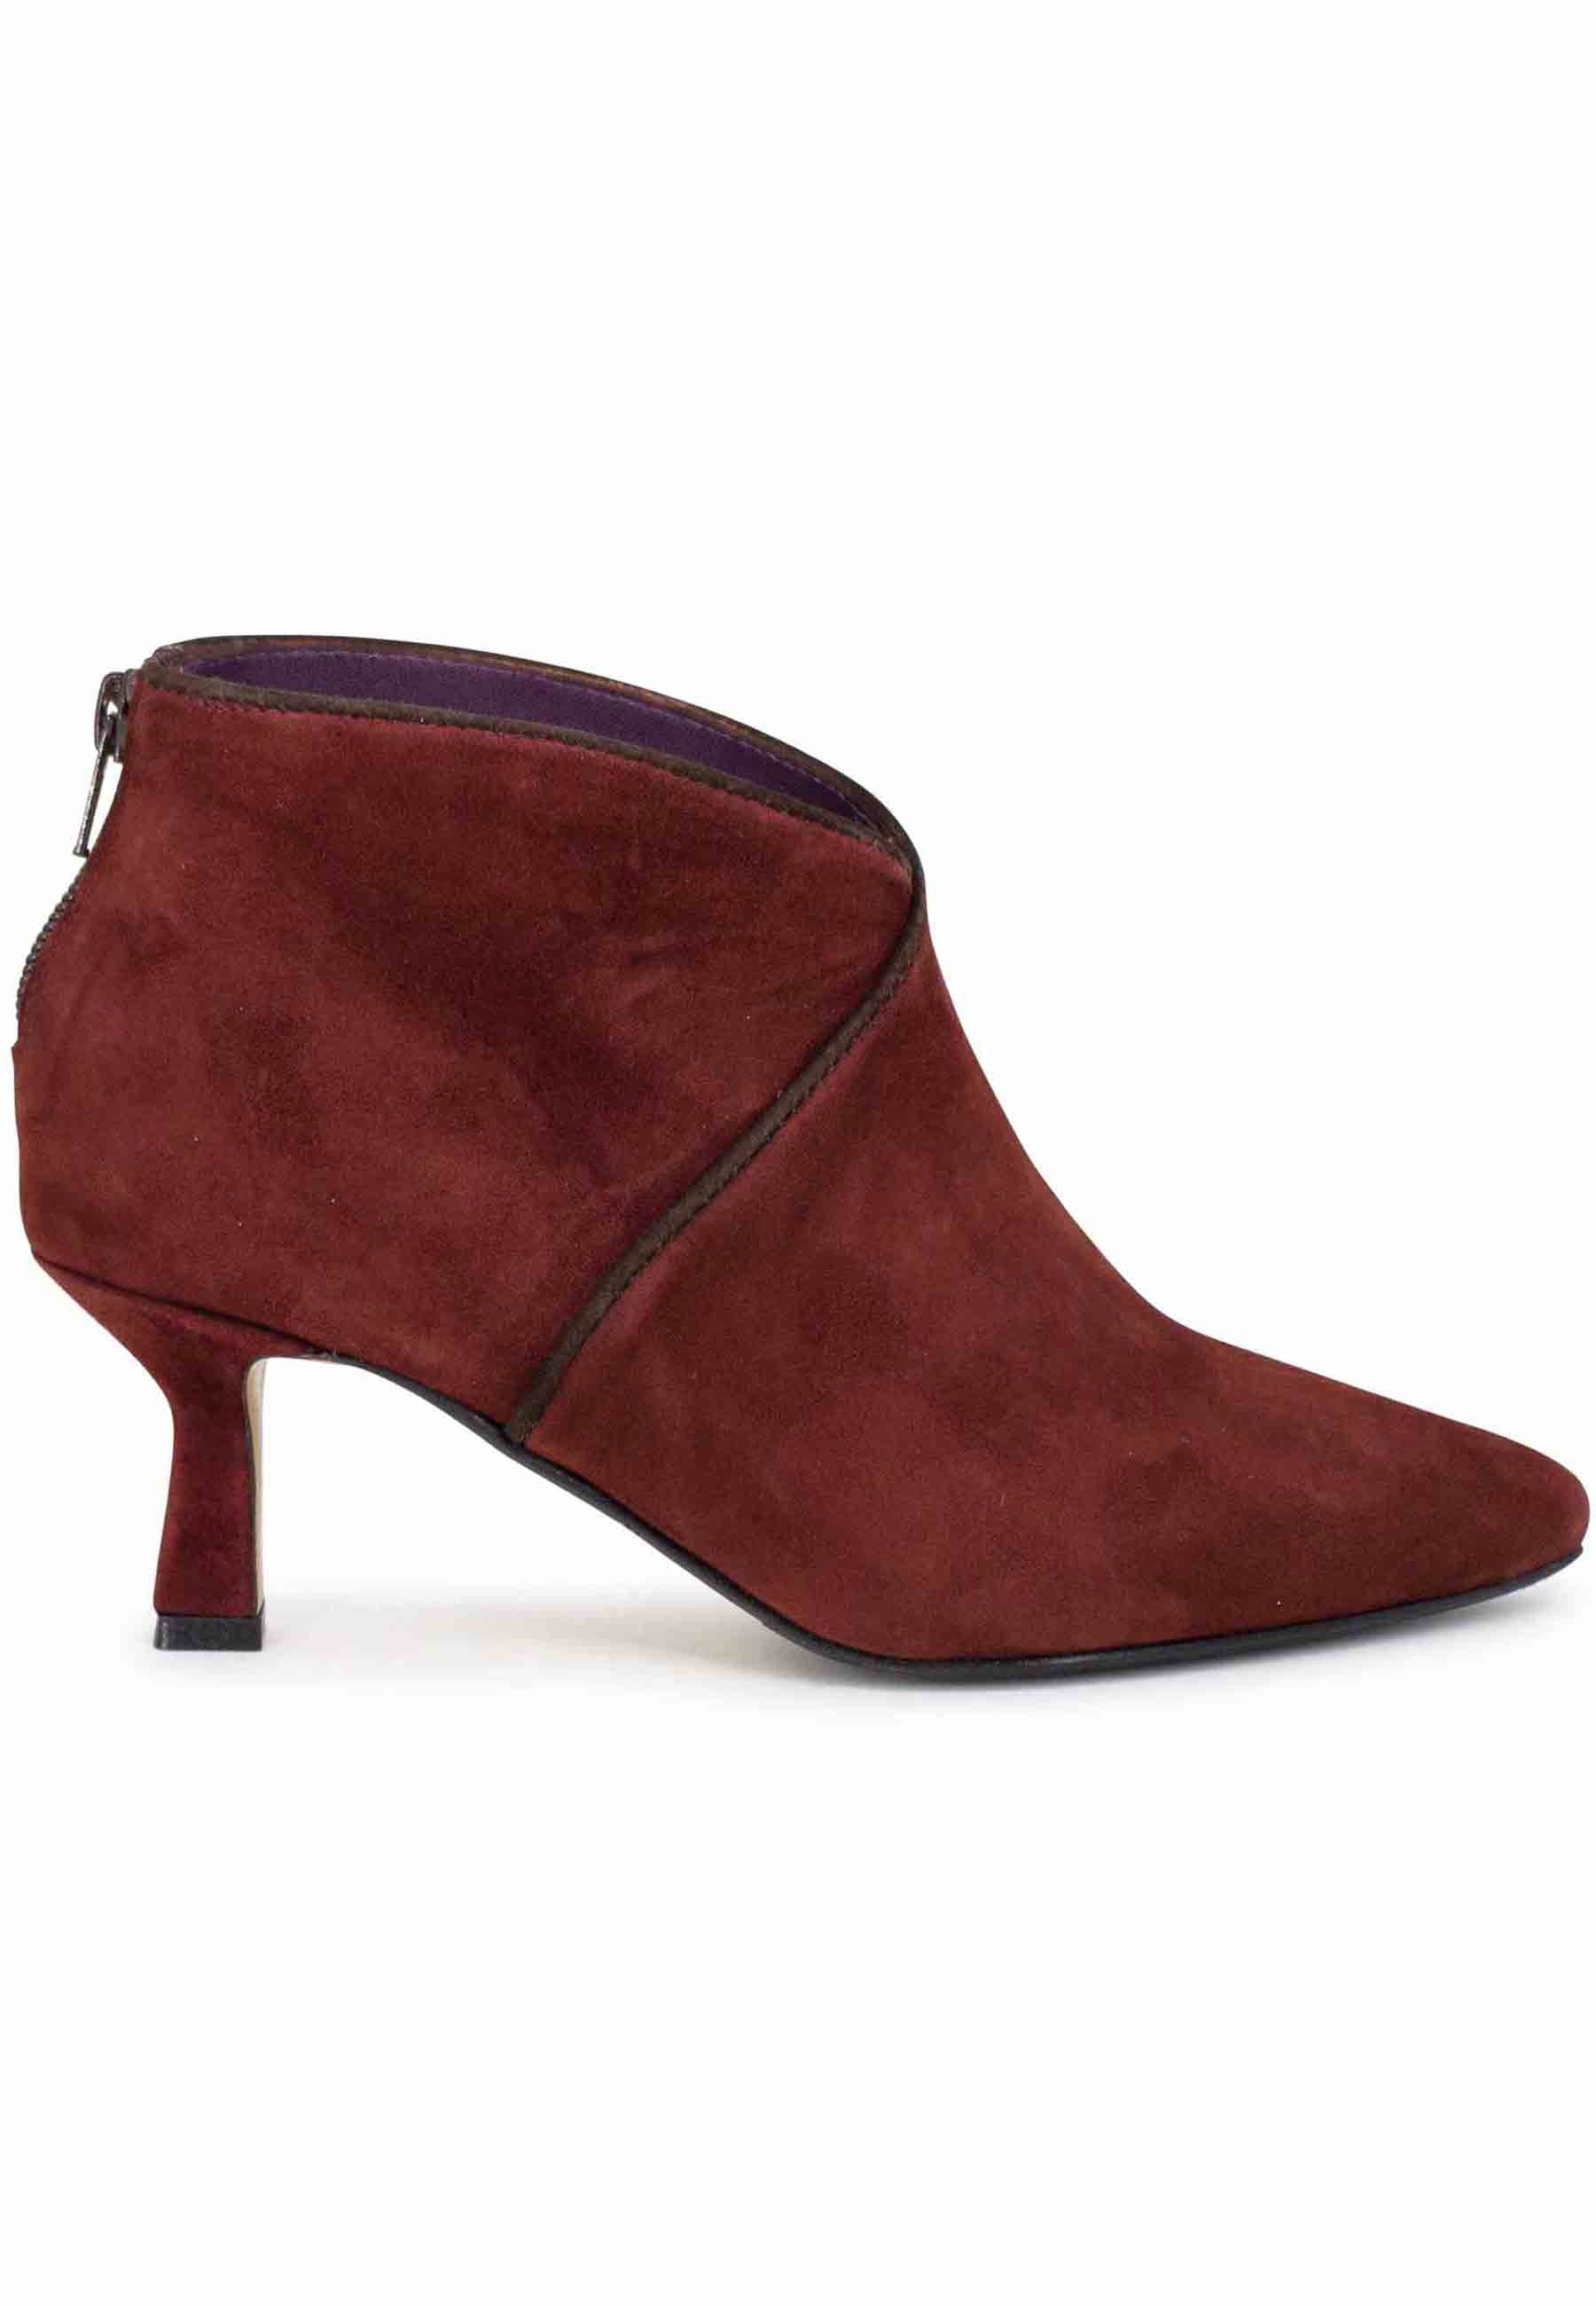 Women's ankle boots in brown suede with back zip